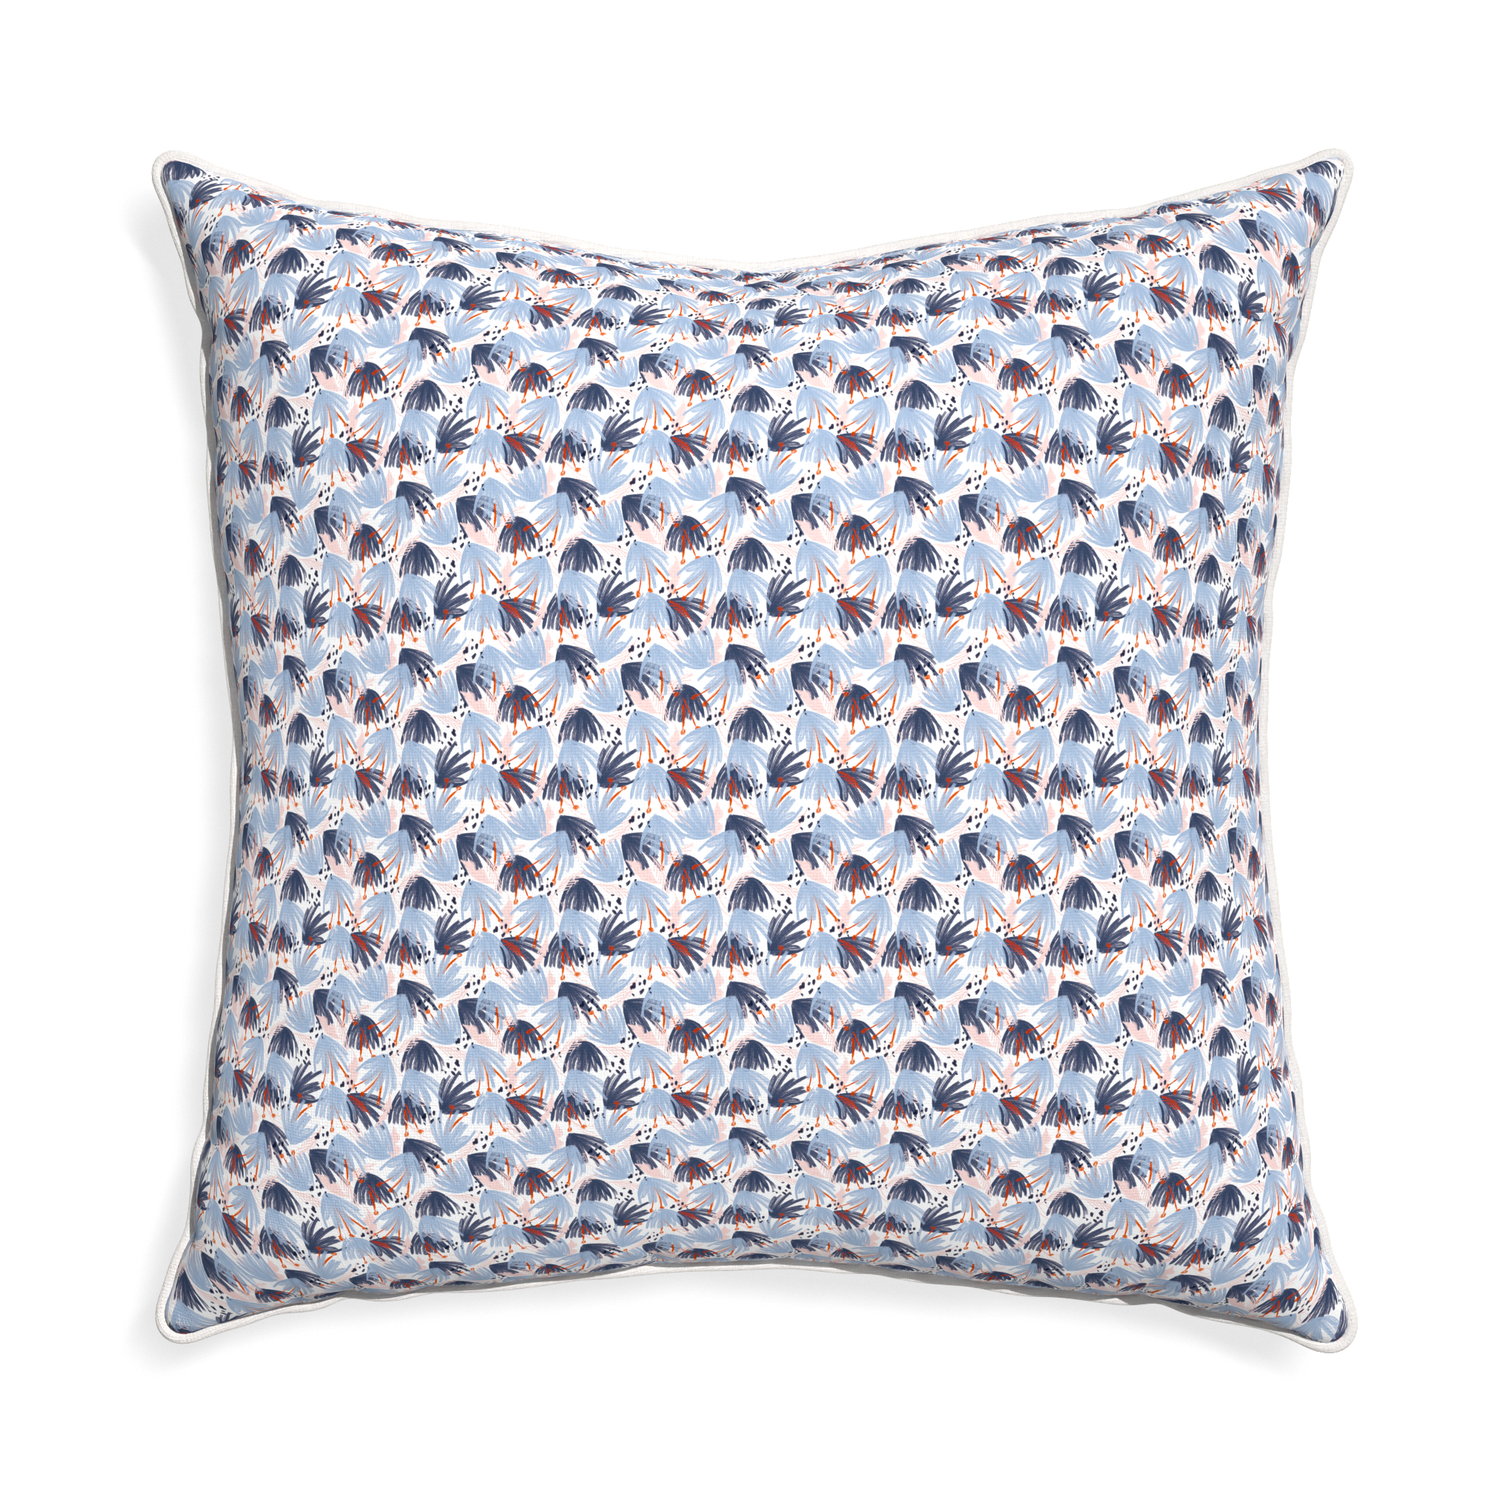 Euro-sham eden blue custom pillow with snow piping on white background